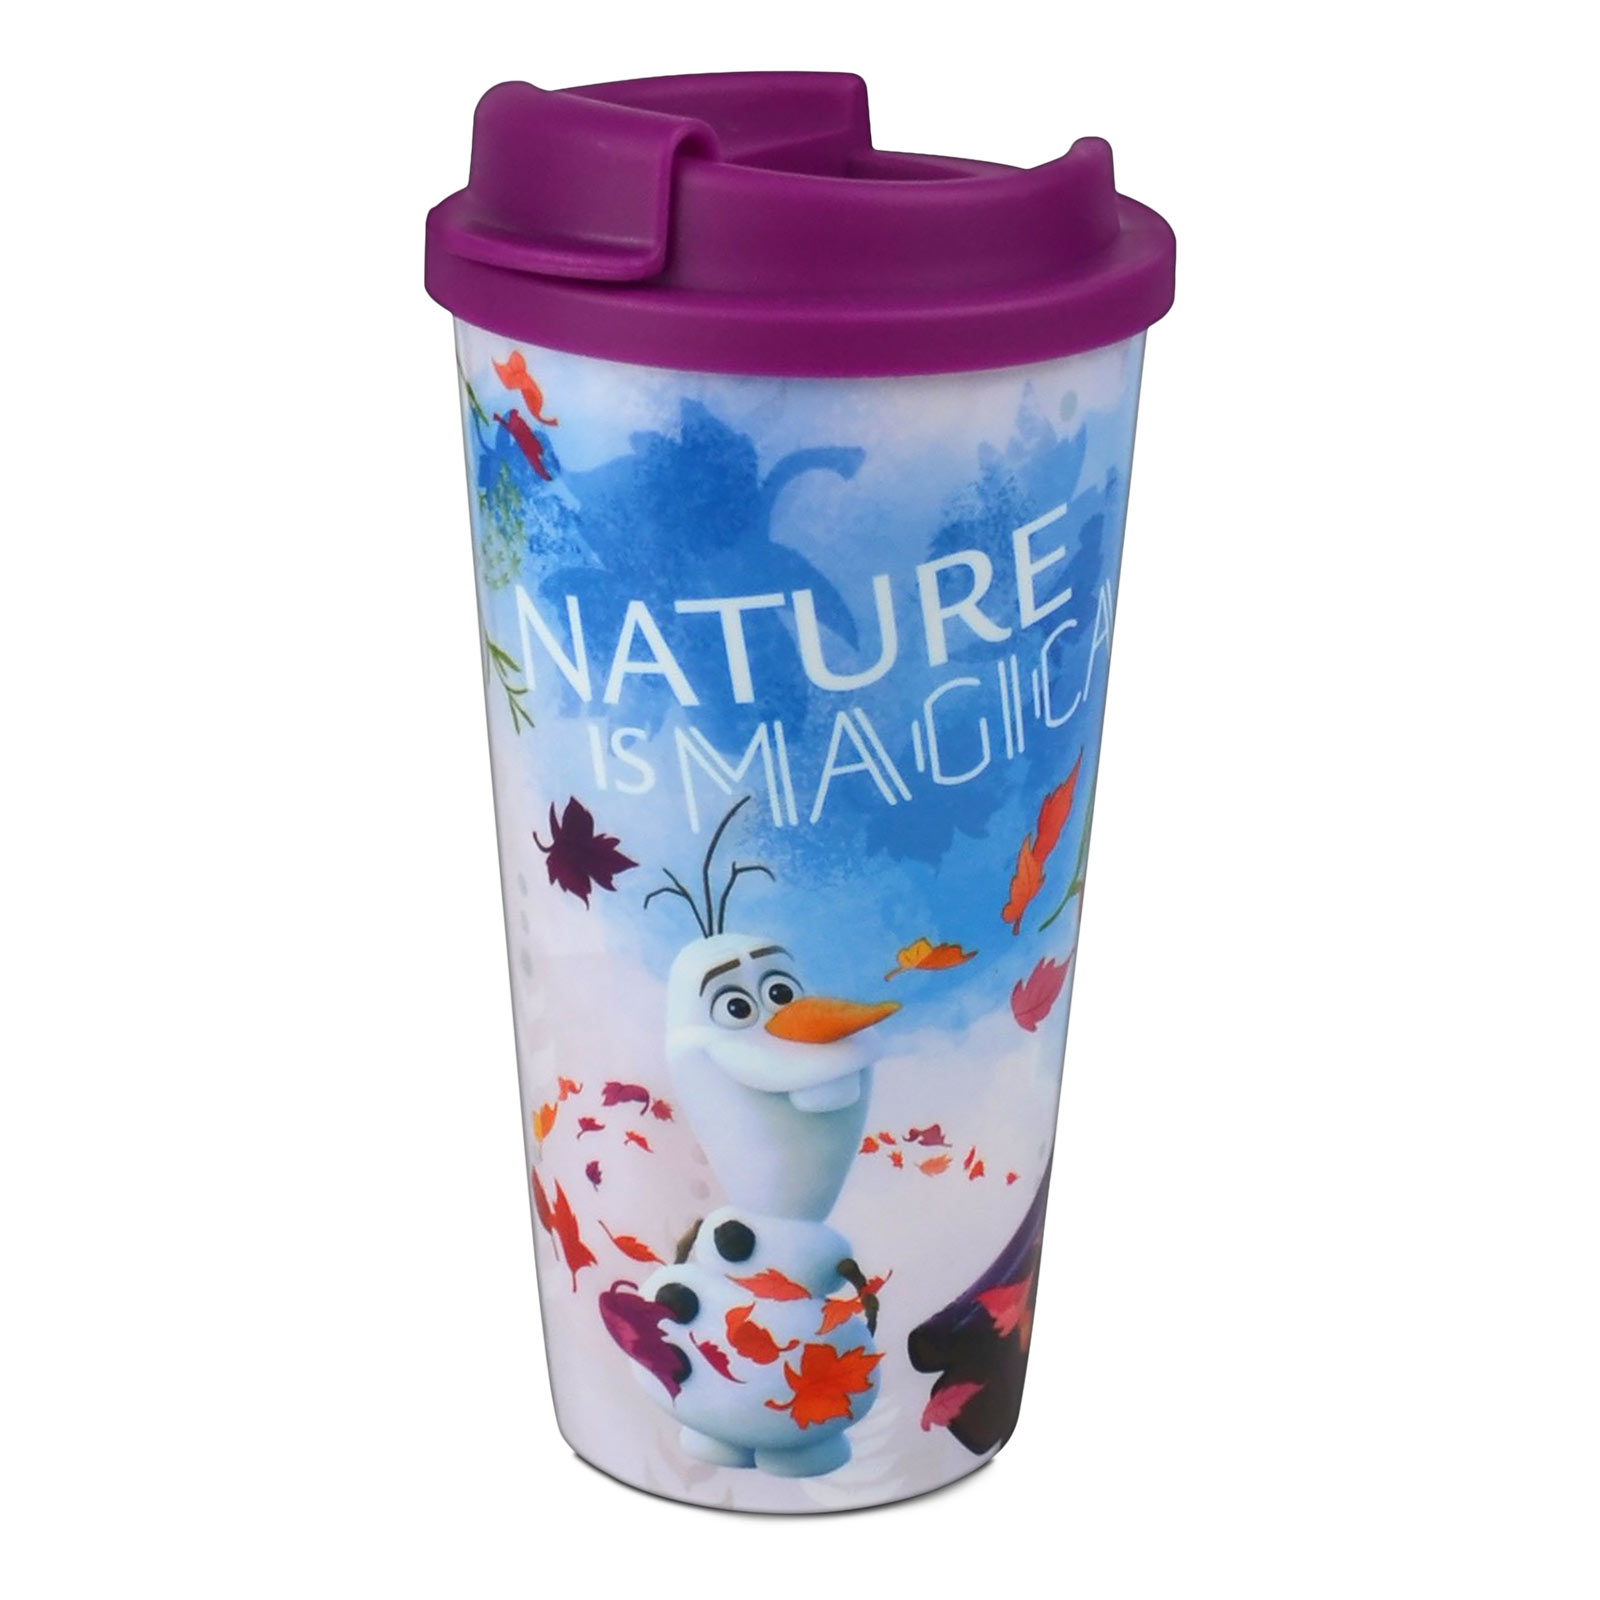 Frozen - Olaf, Anna and Elsa To Go Cup